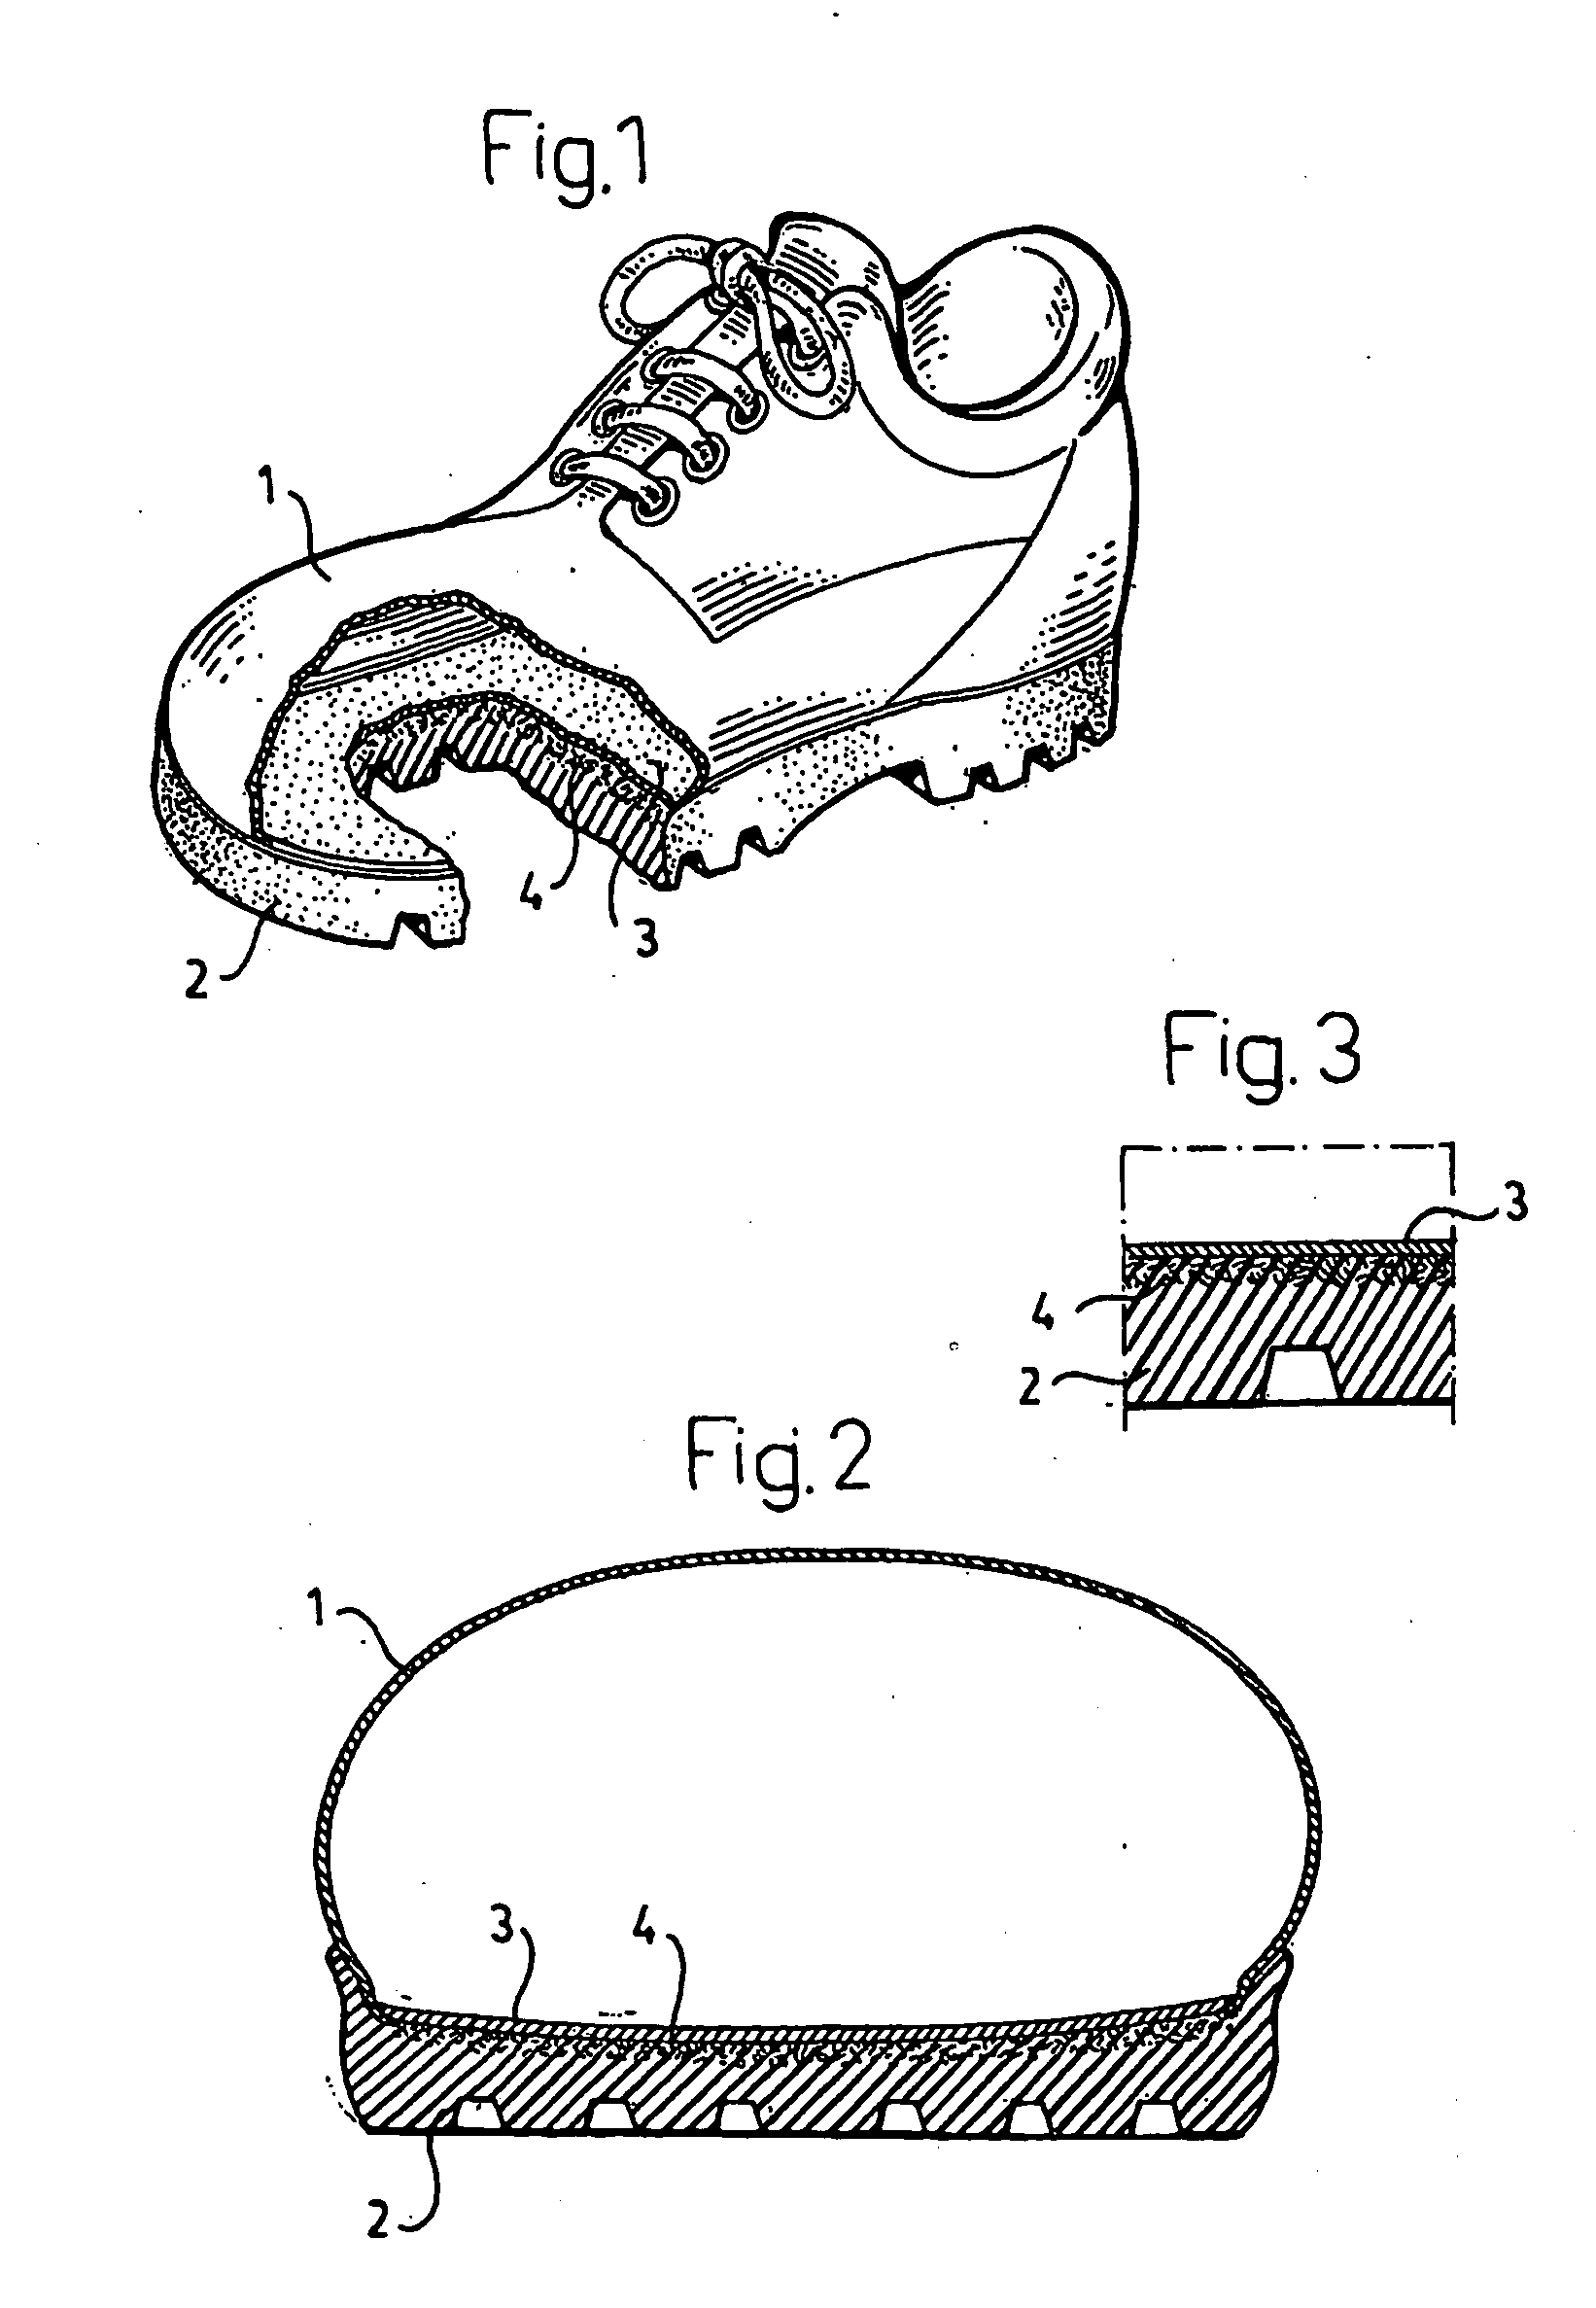 Flexible anti-nail protective footwear, flexible anti-nail protective clothing article, and methods for manufacturing the same